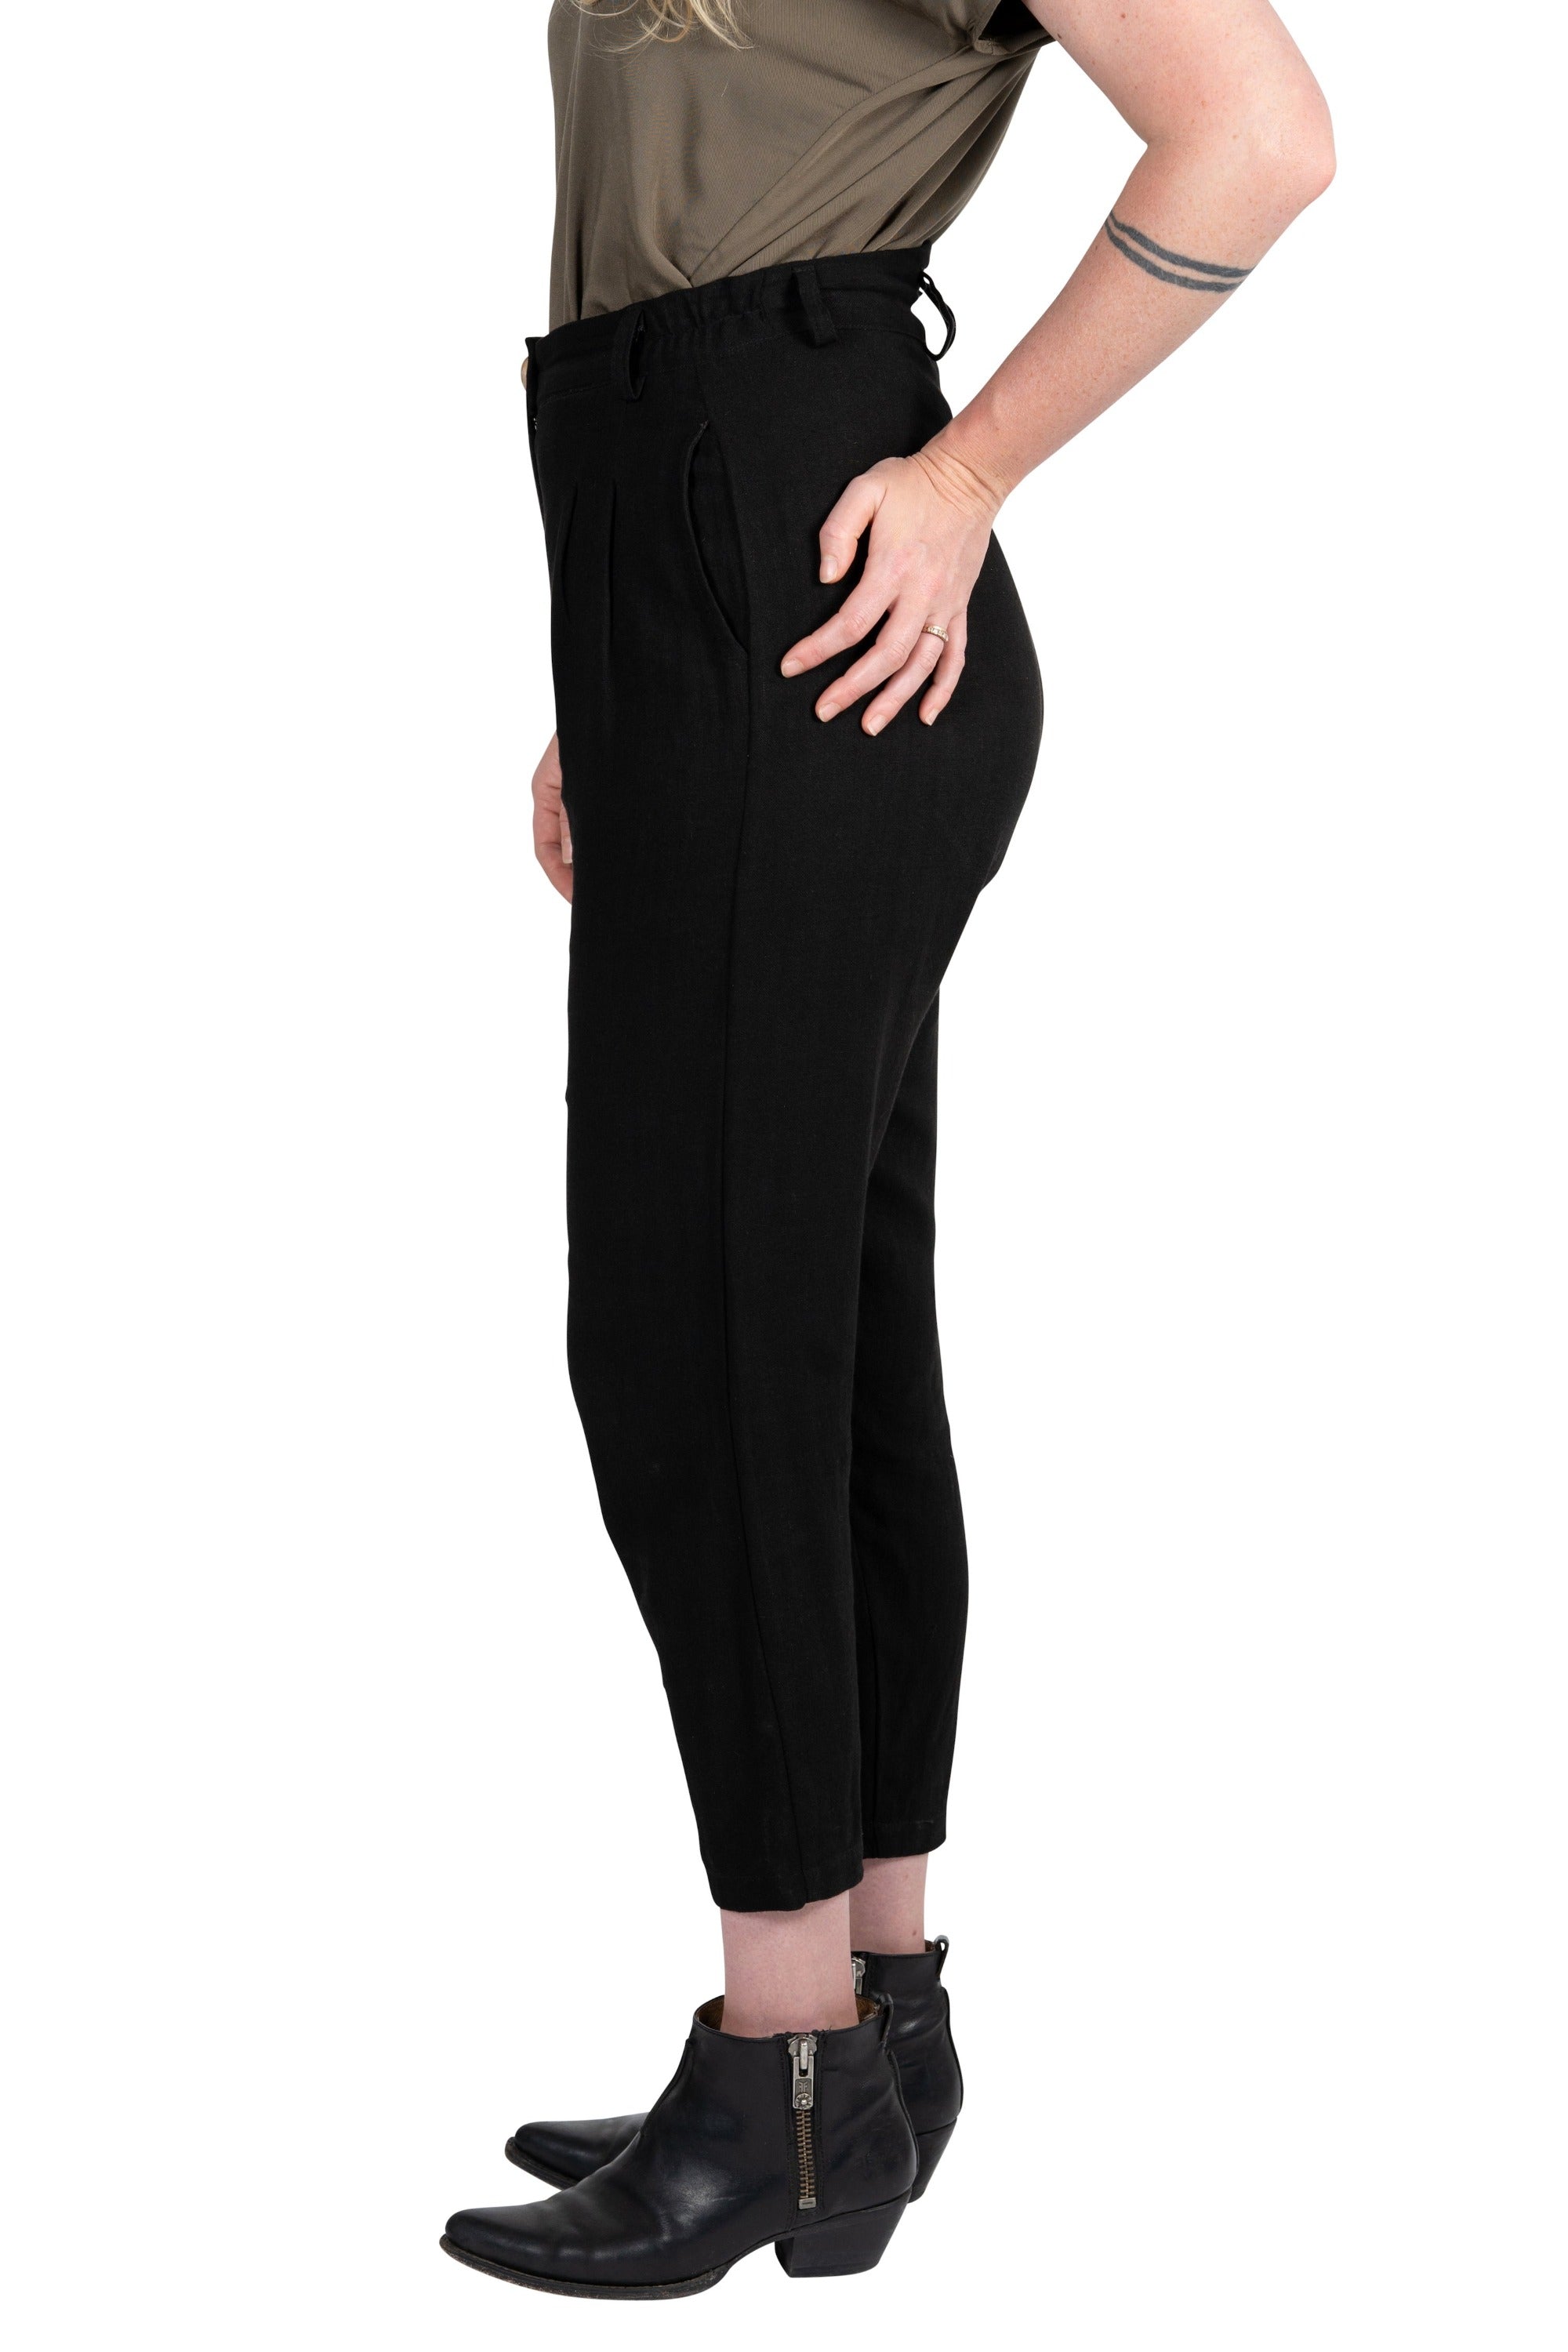 Perfect Pant 2.0 in Black Linen – Field Day